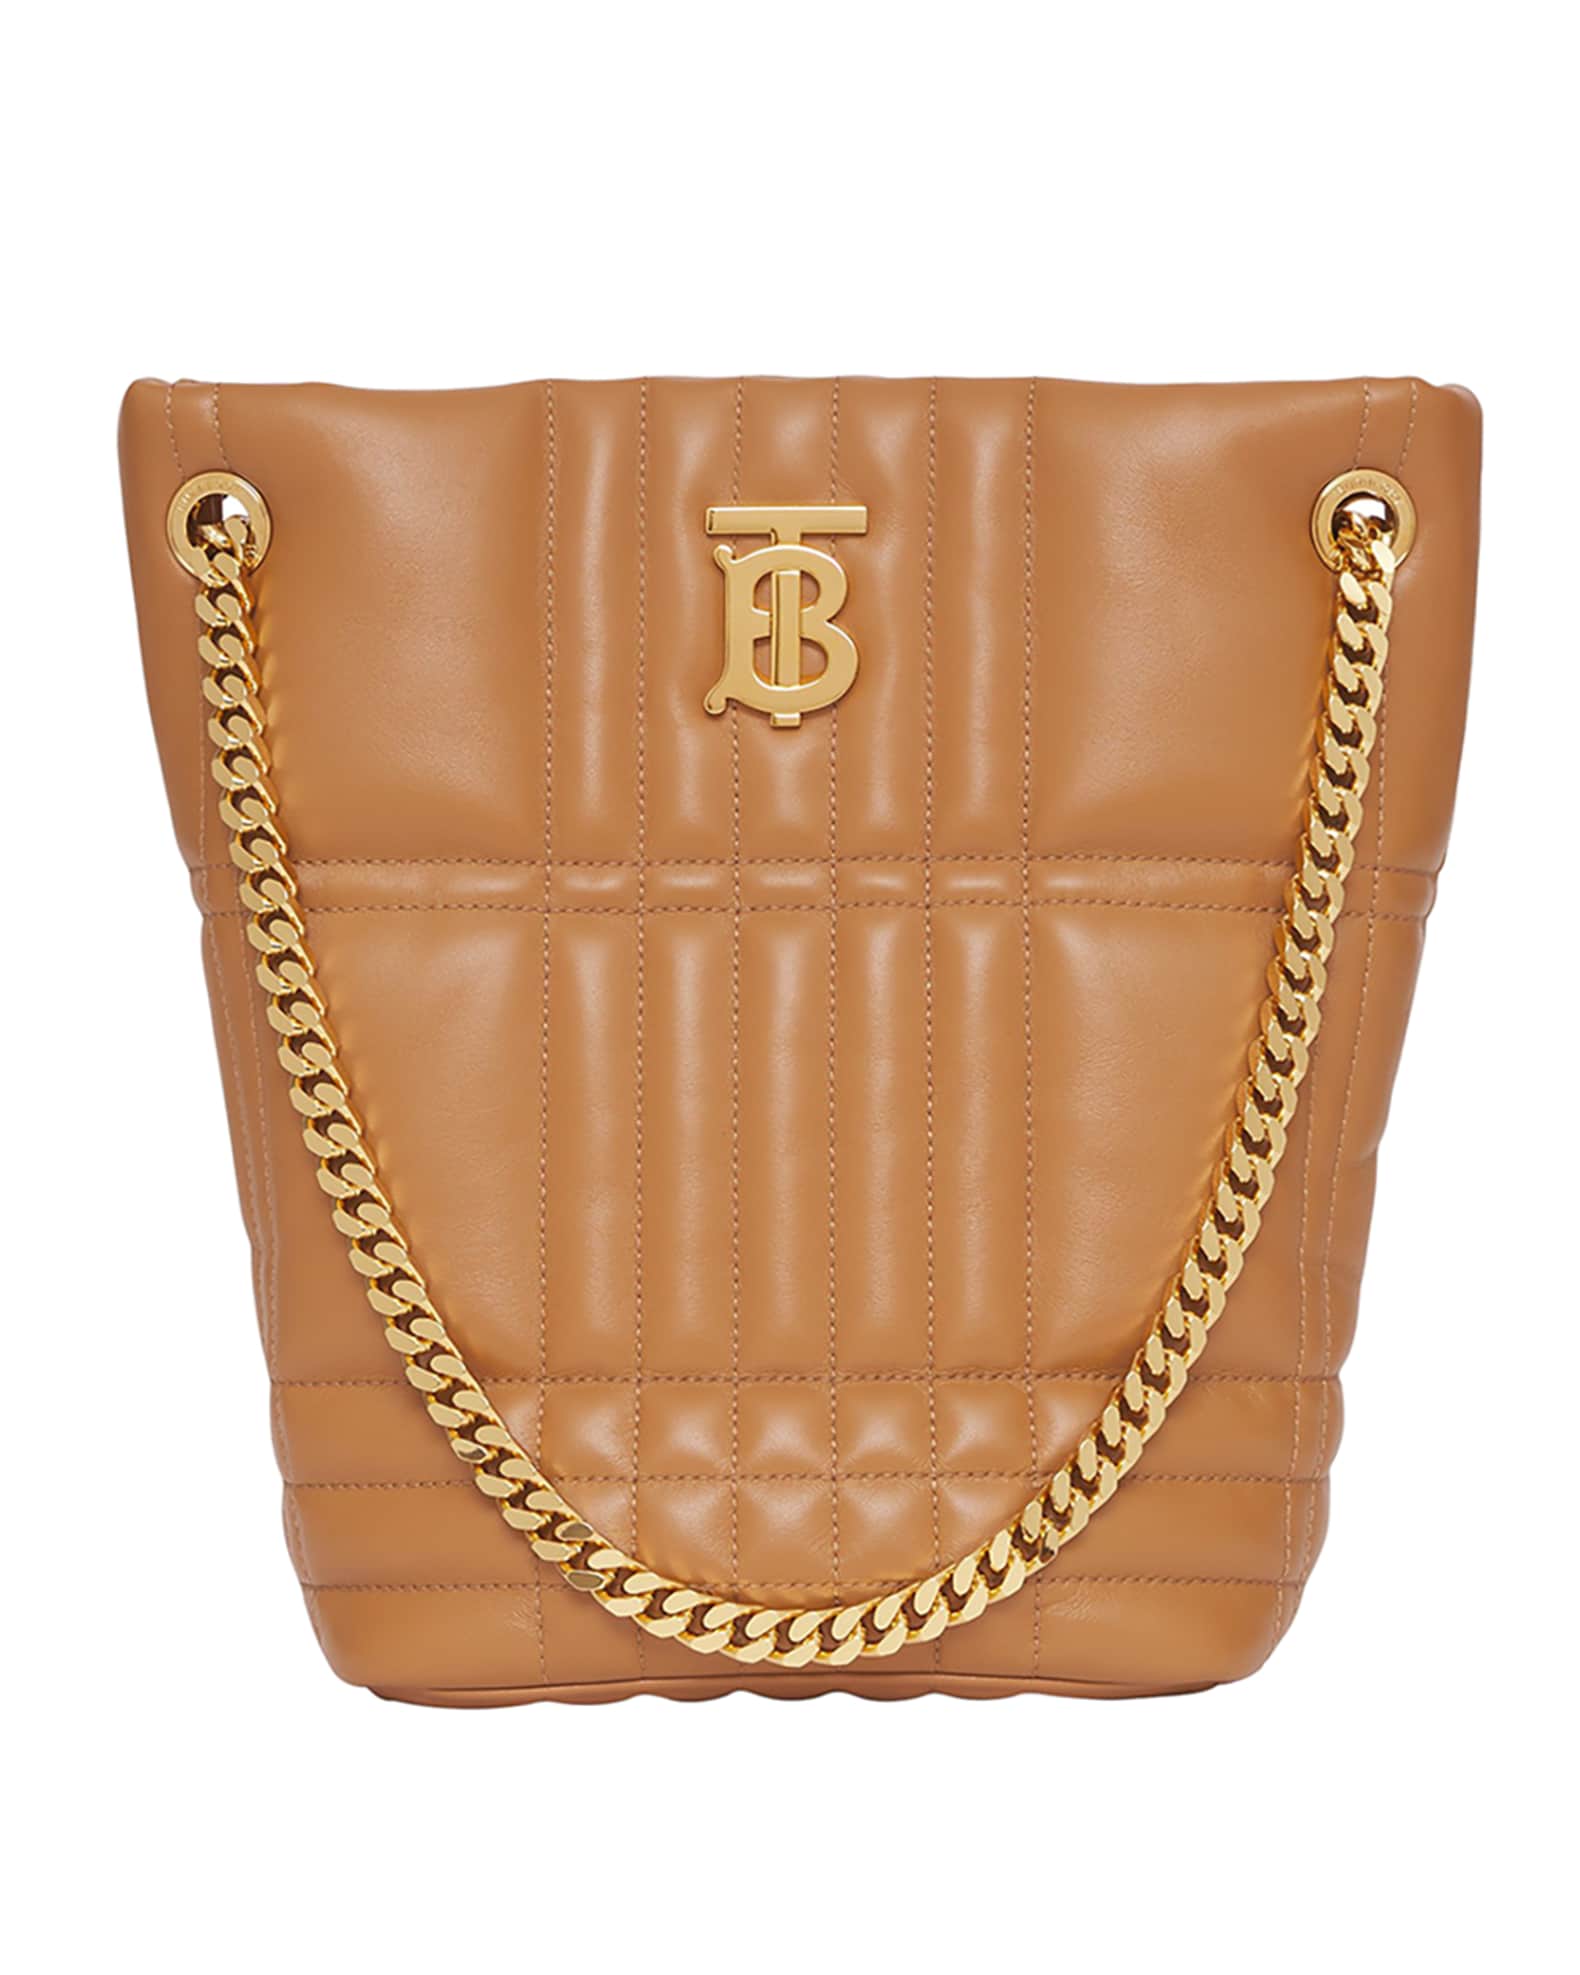 Burberry Lola TB Check Quilted Chain Bucket Bag | Neiman Marcus